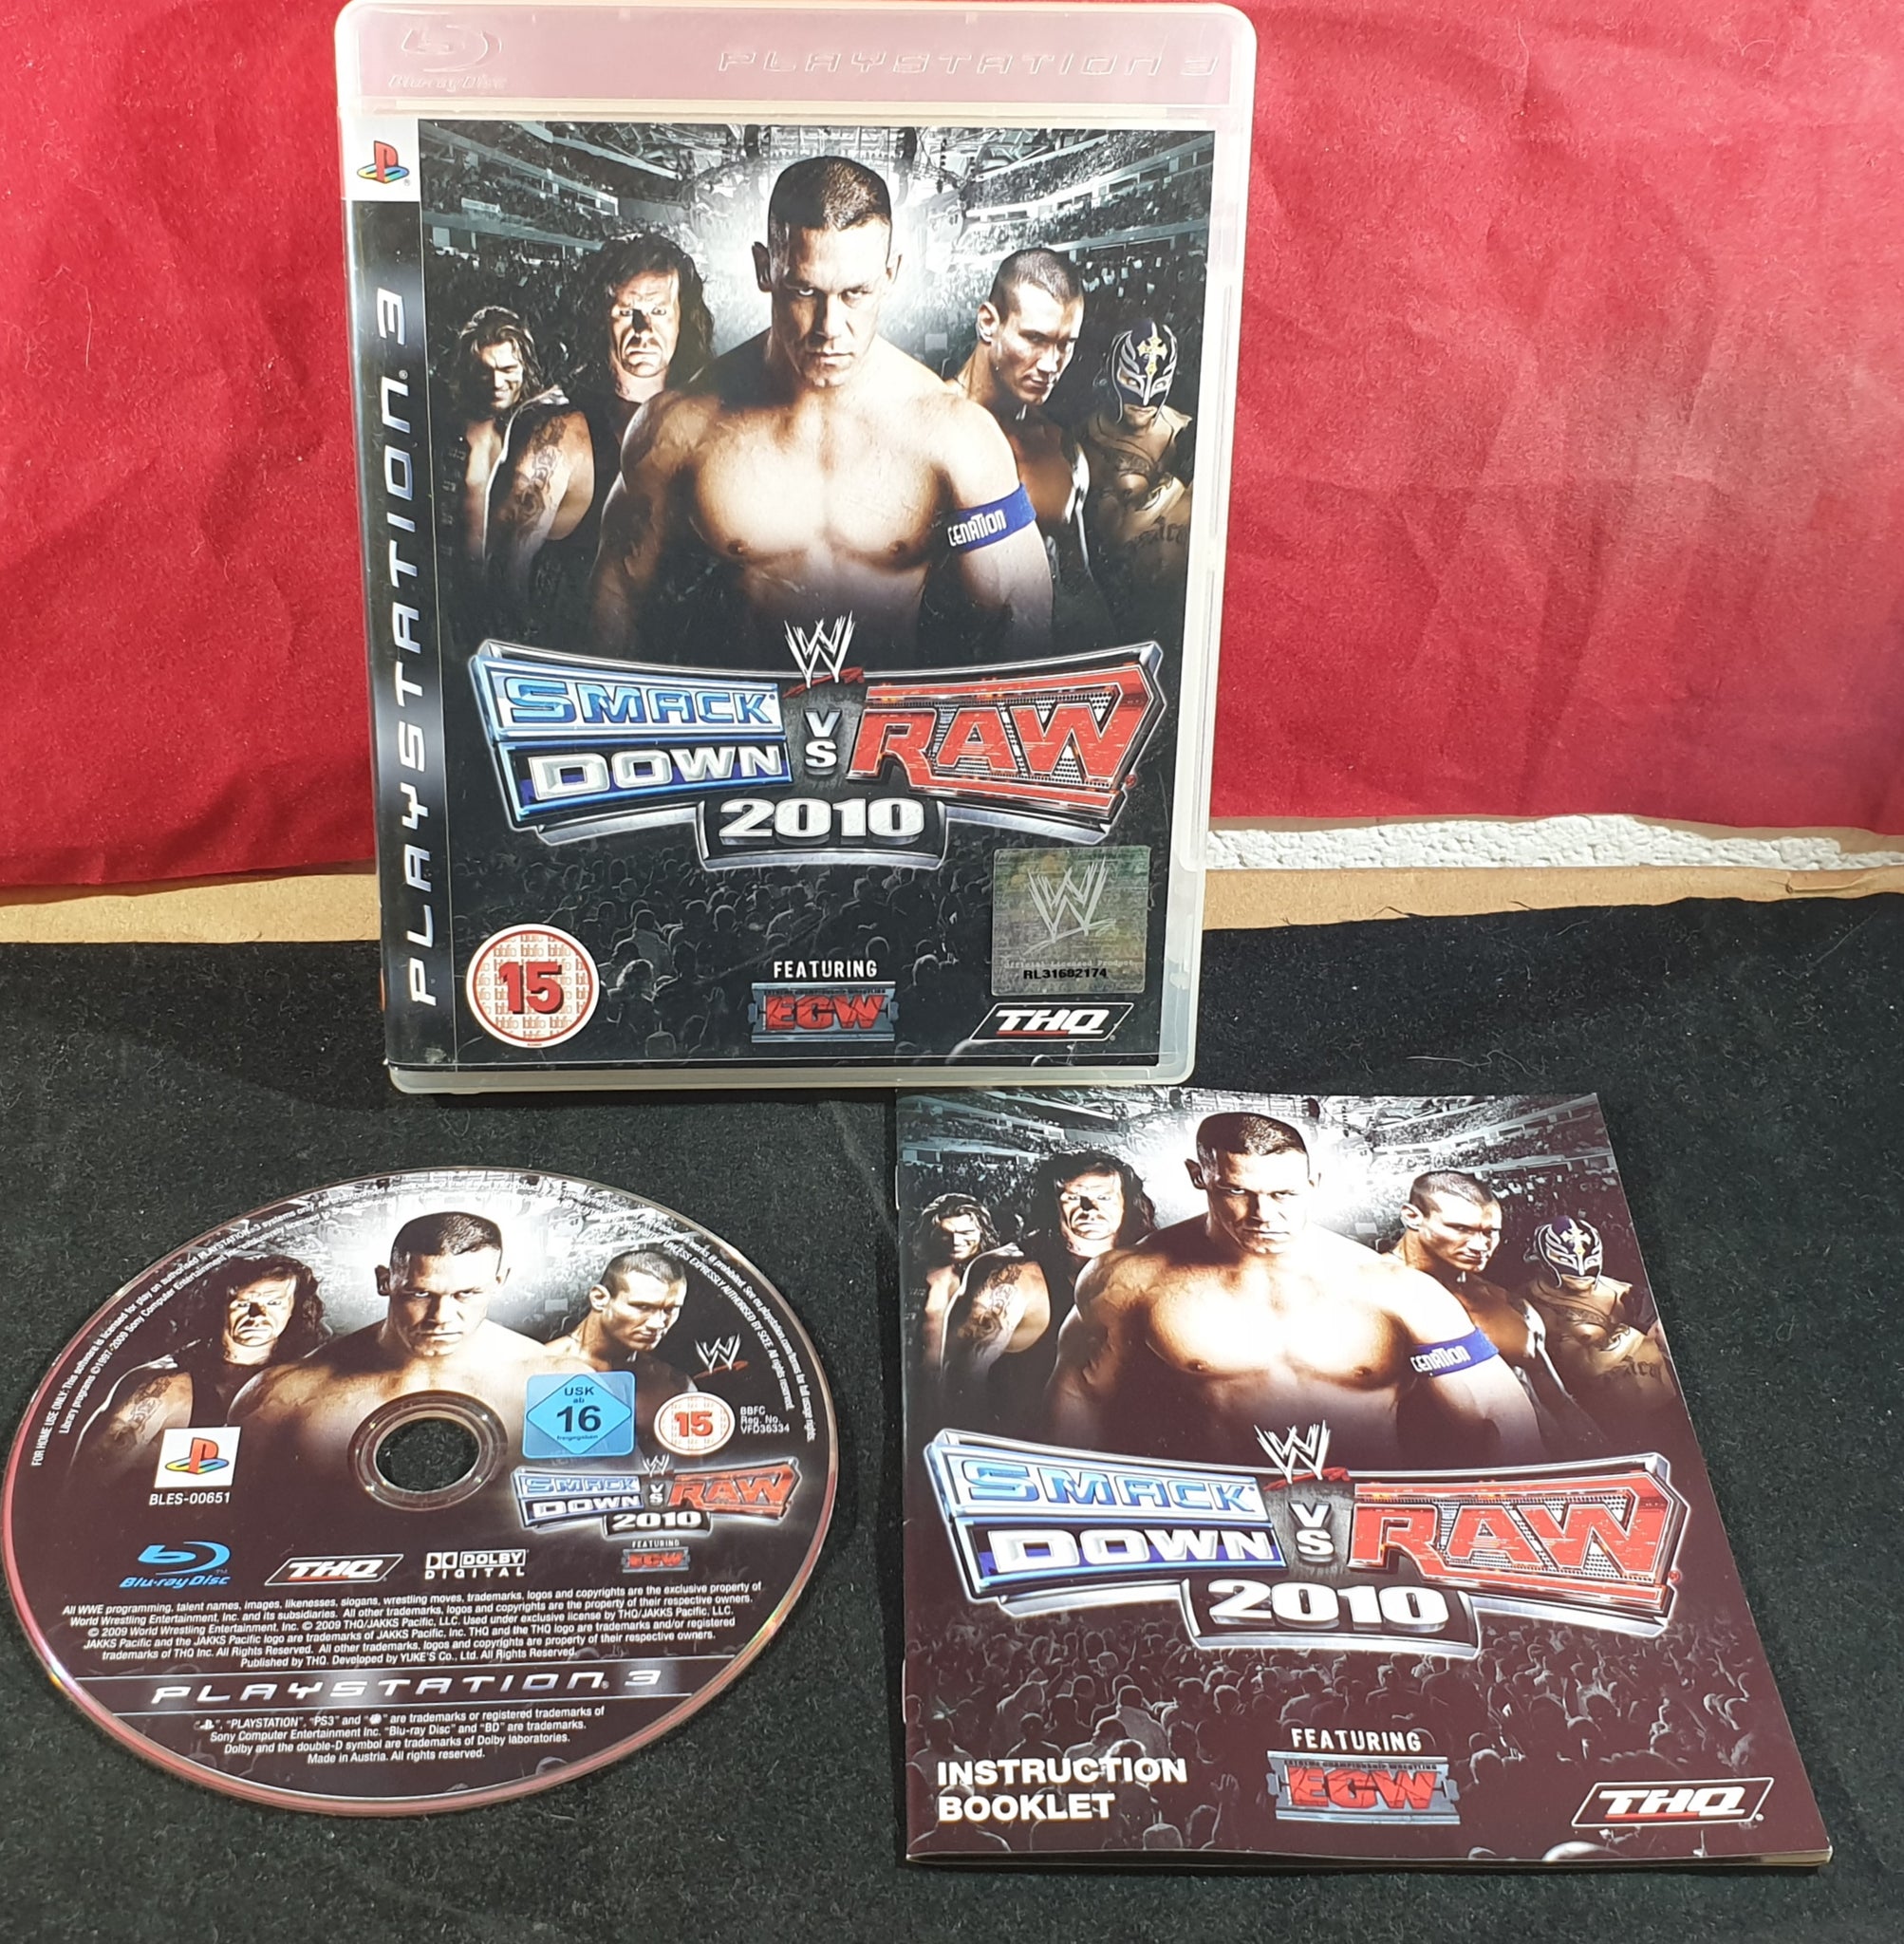 Wwe Smackdown Vs Raw 10 Sony Playstation 3 Ps3 Game Retro Gamer Heaven